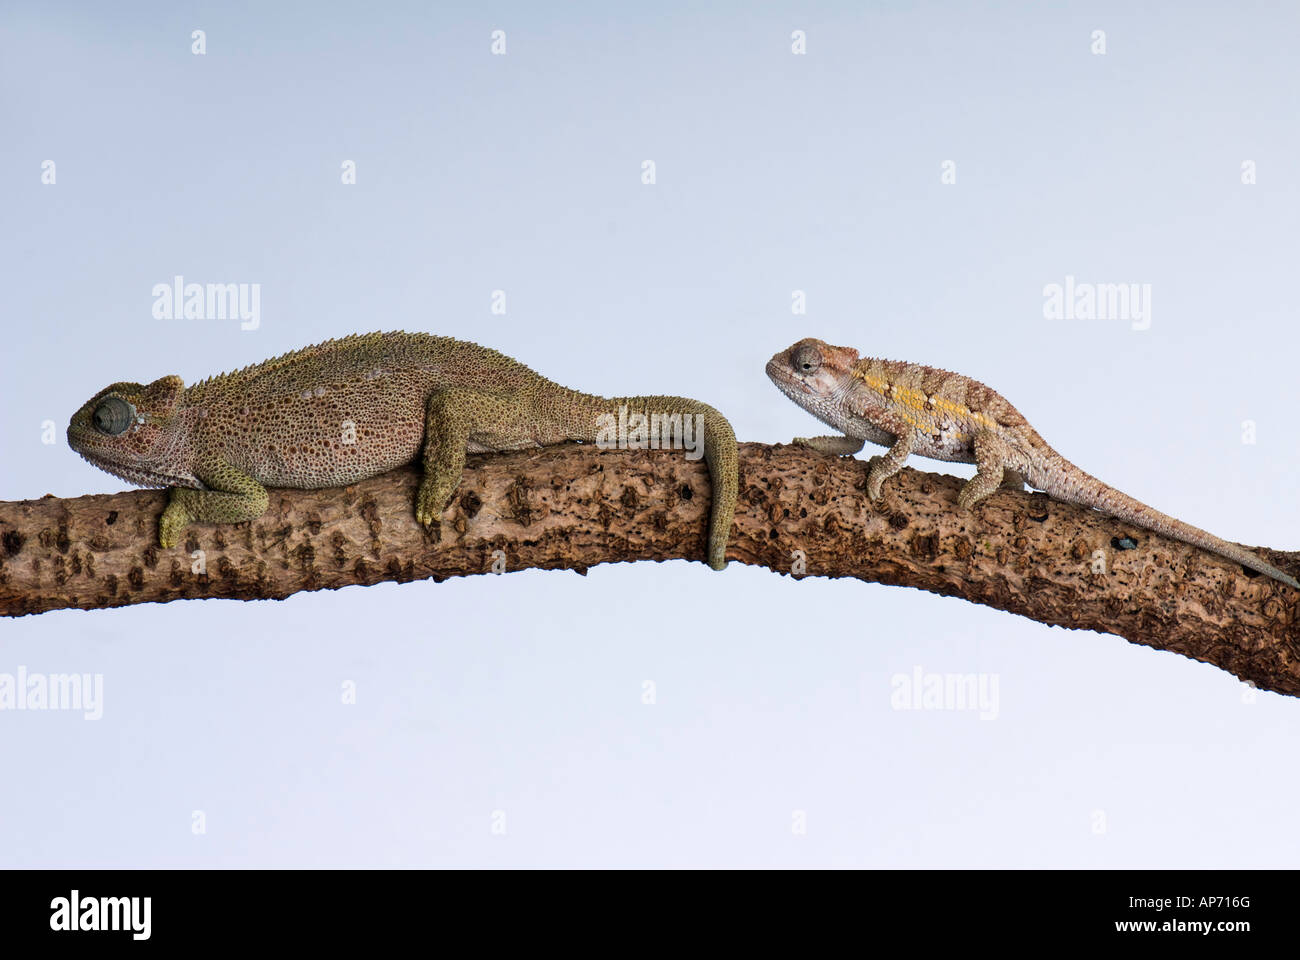 Mother and baby chameleon on tree branch Stock Photo